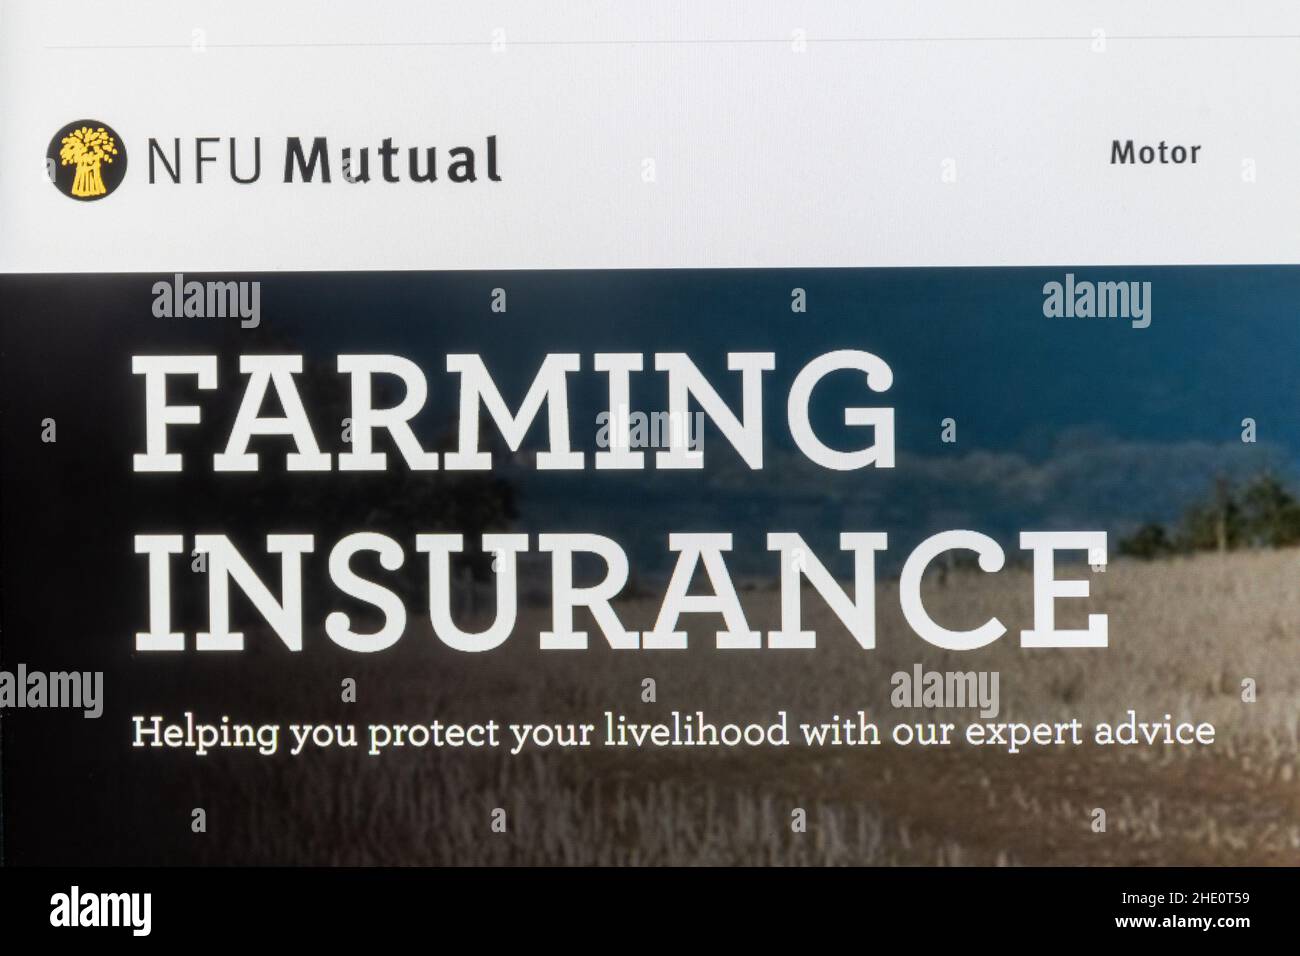 NFU Mutual Insurance company website on a laptop computer, UK. Farming insurance page - protect your livelihood. Stock Photo